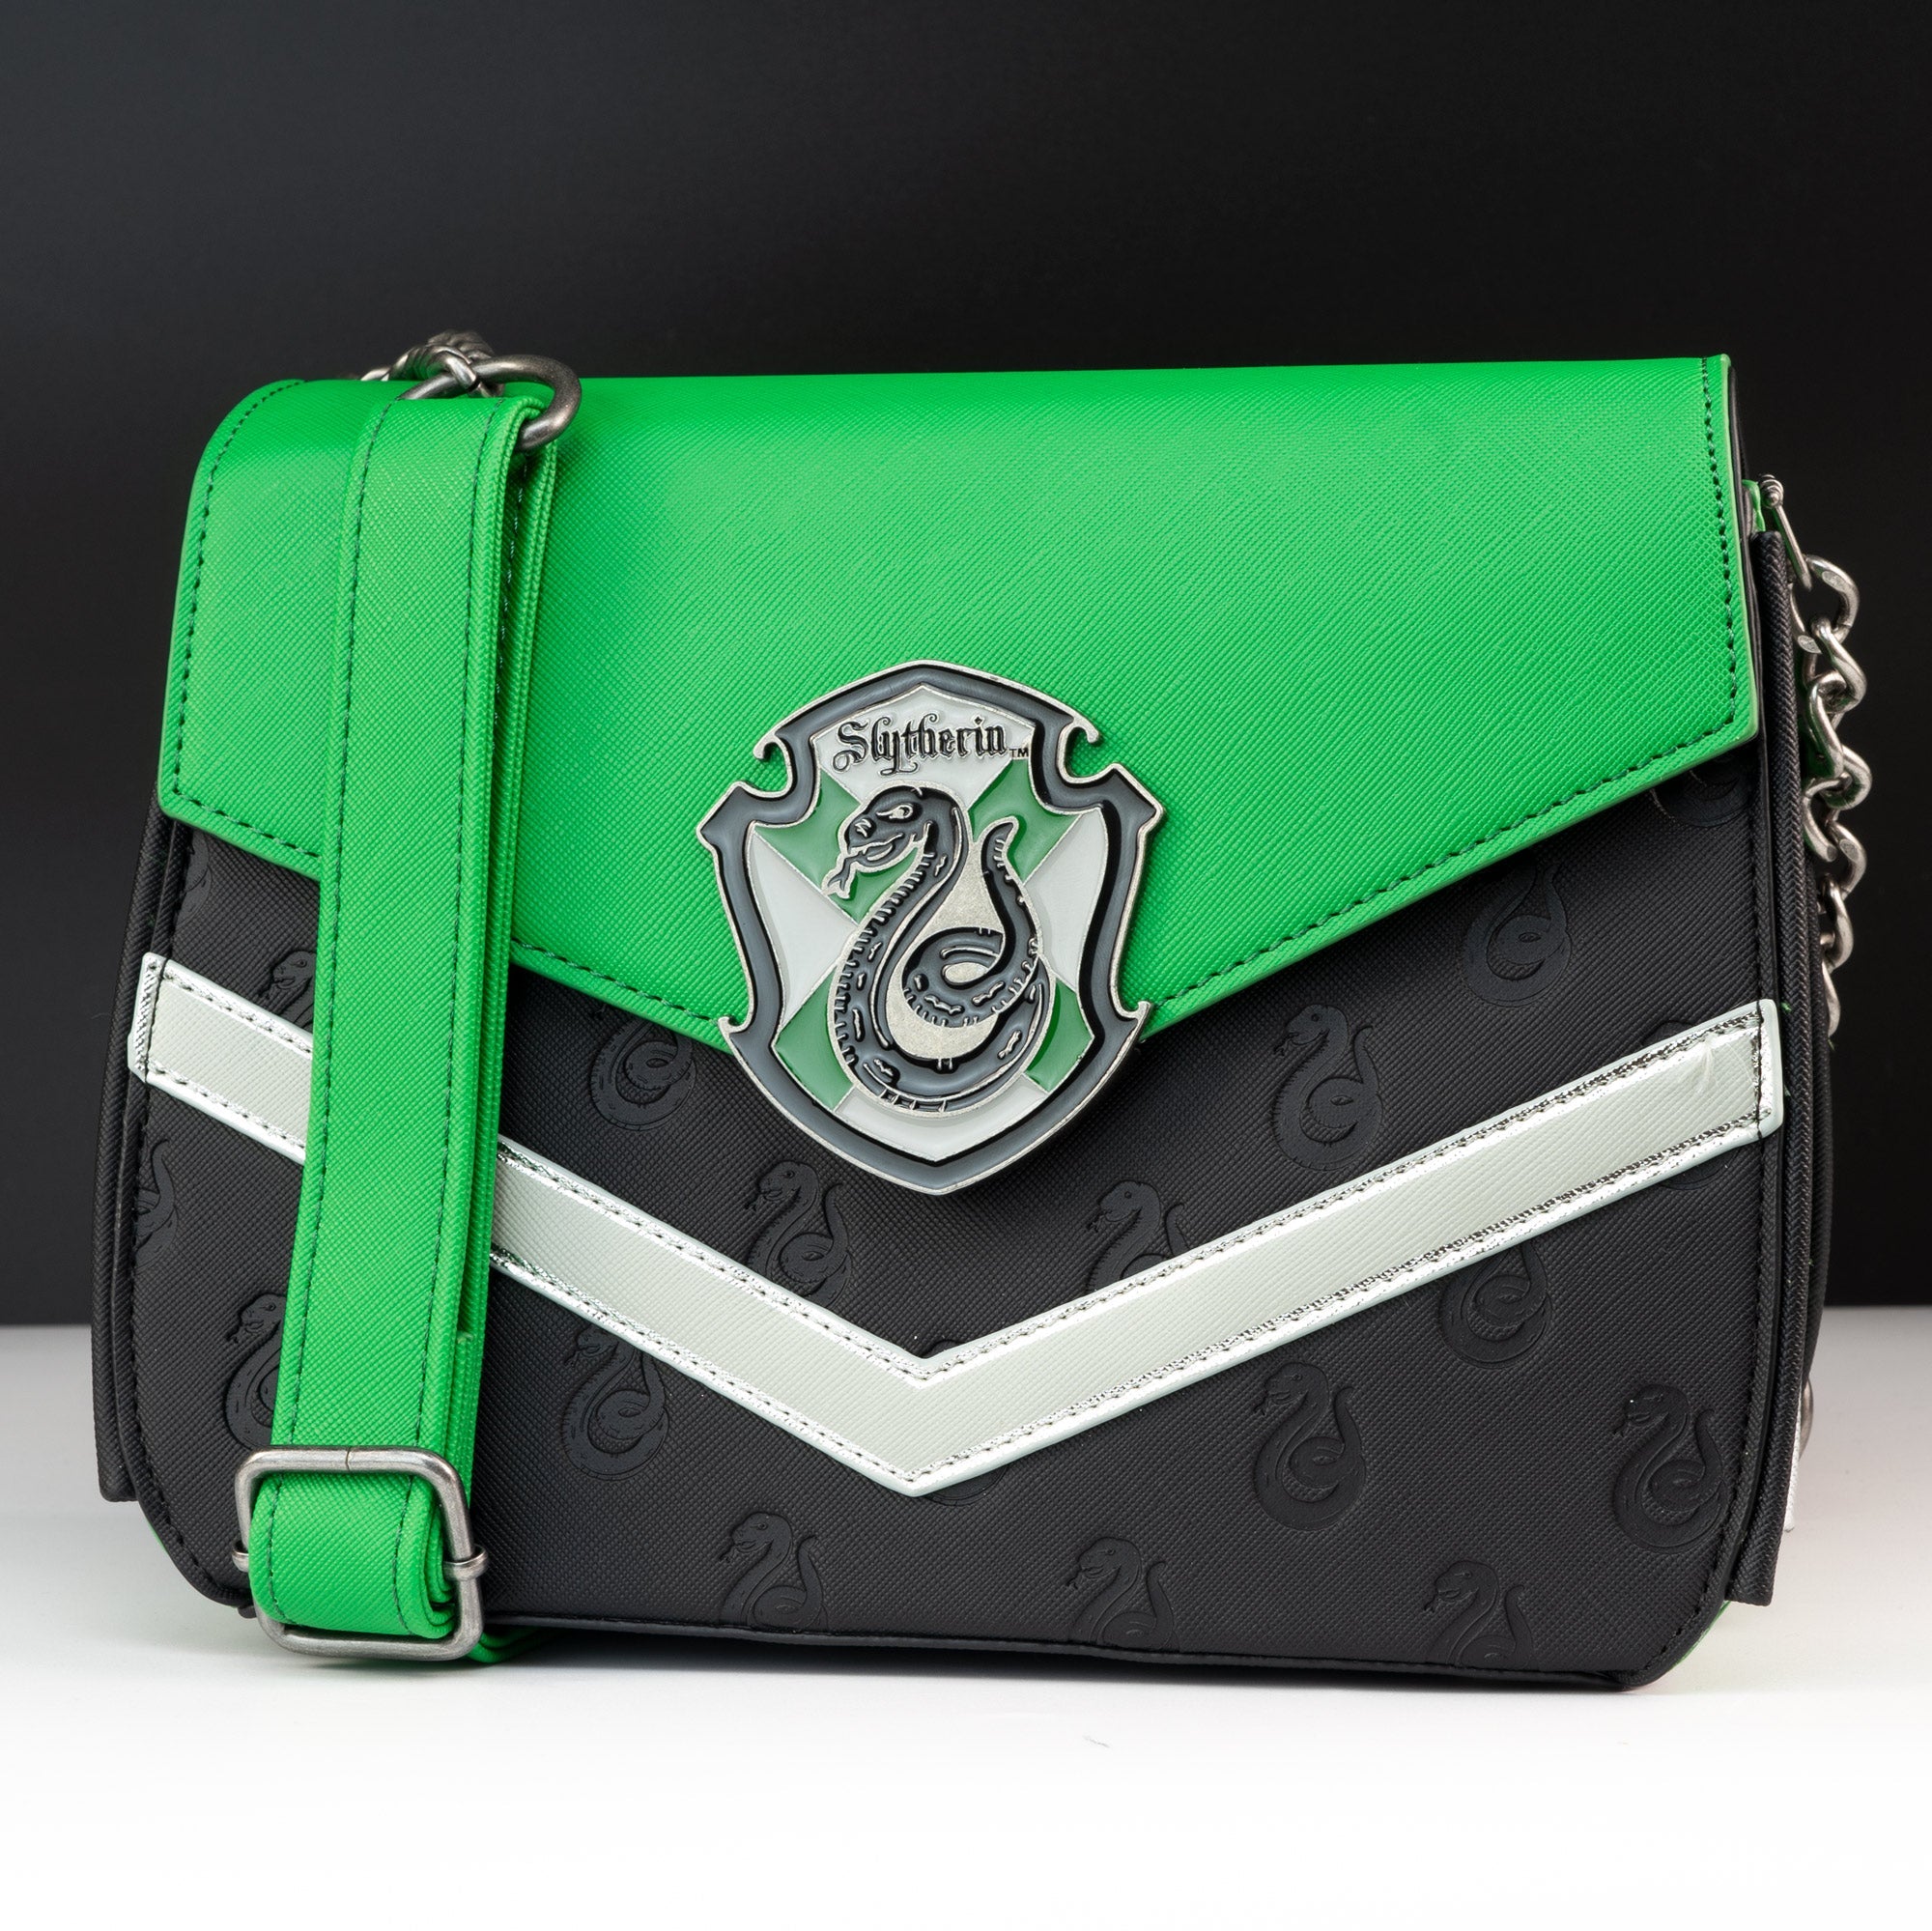 Loungefly x Harry Potter Slytherin Chain Strap Crossbody Bag - GeekCore